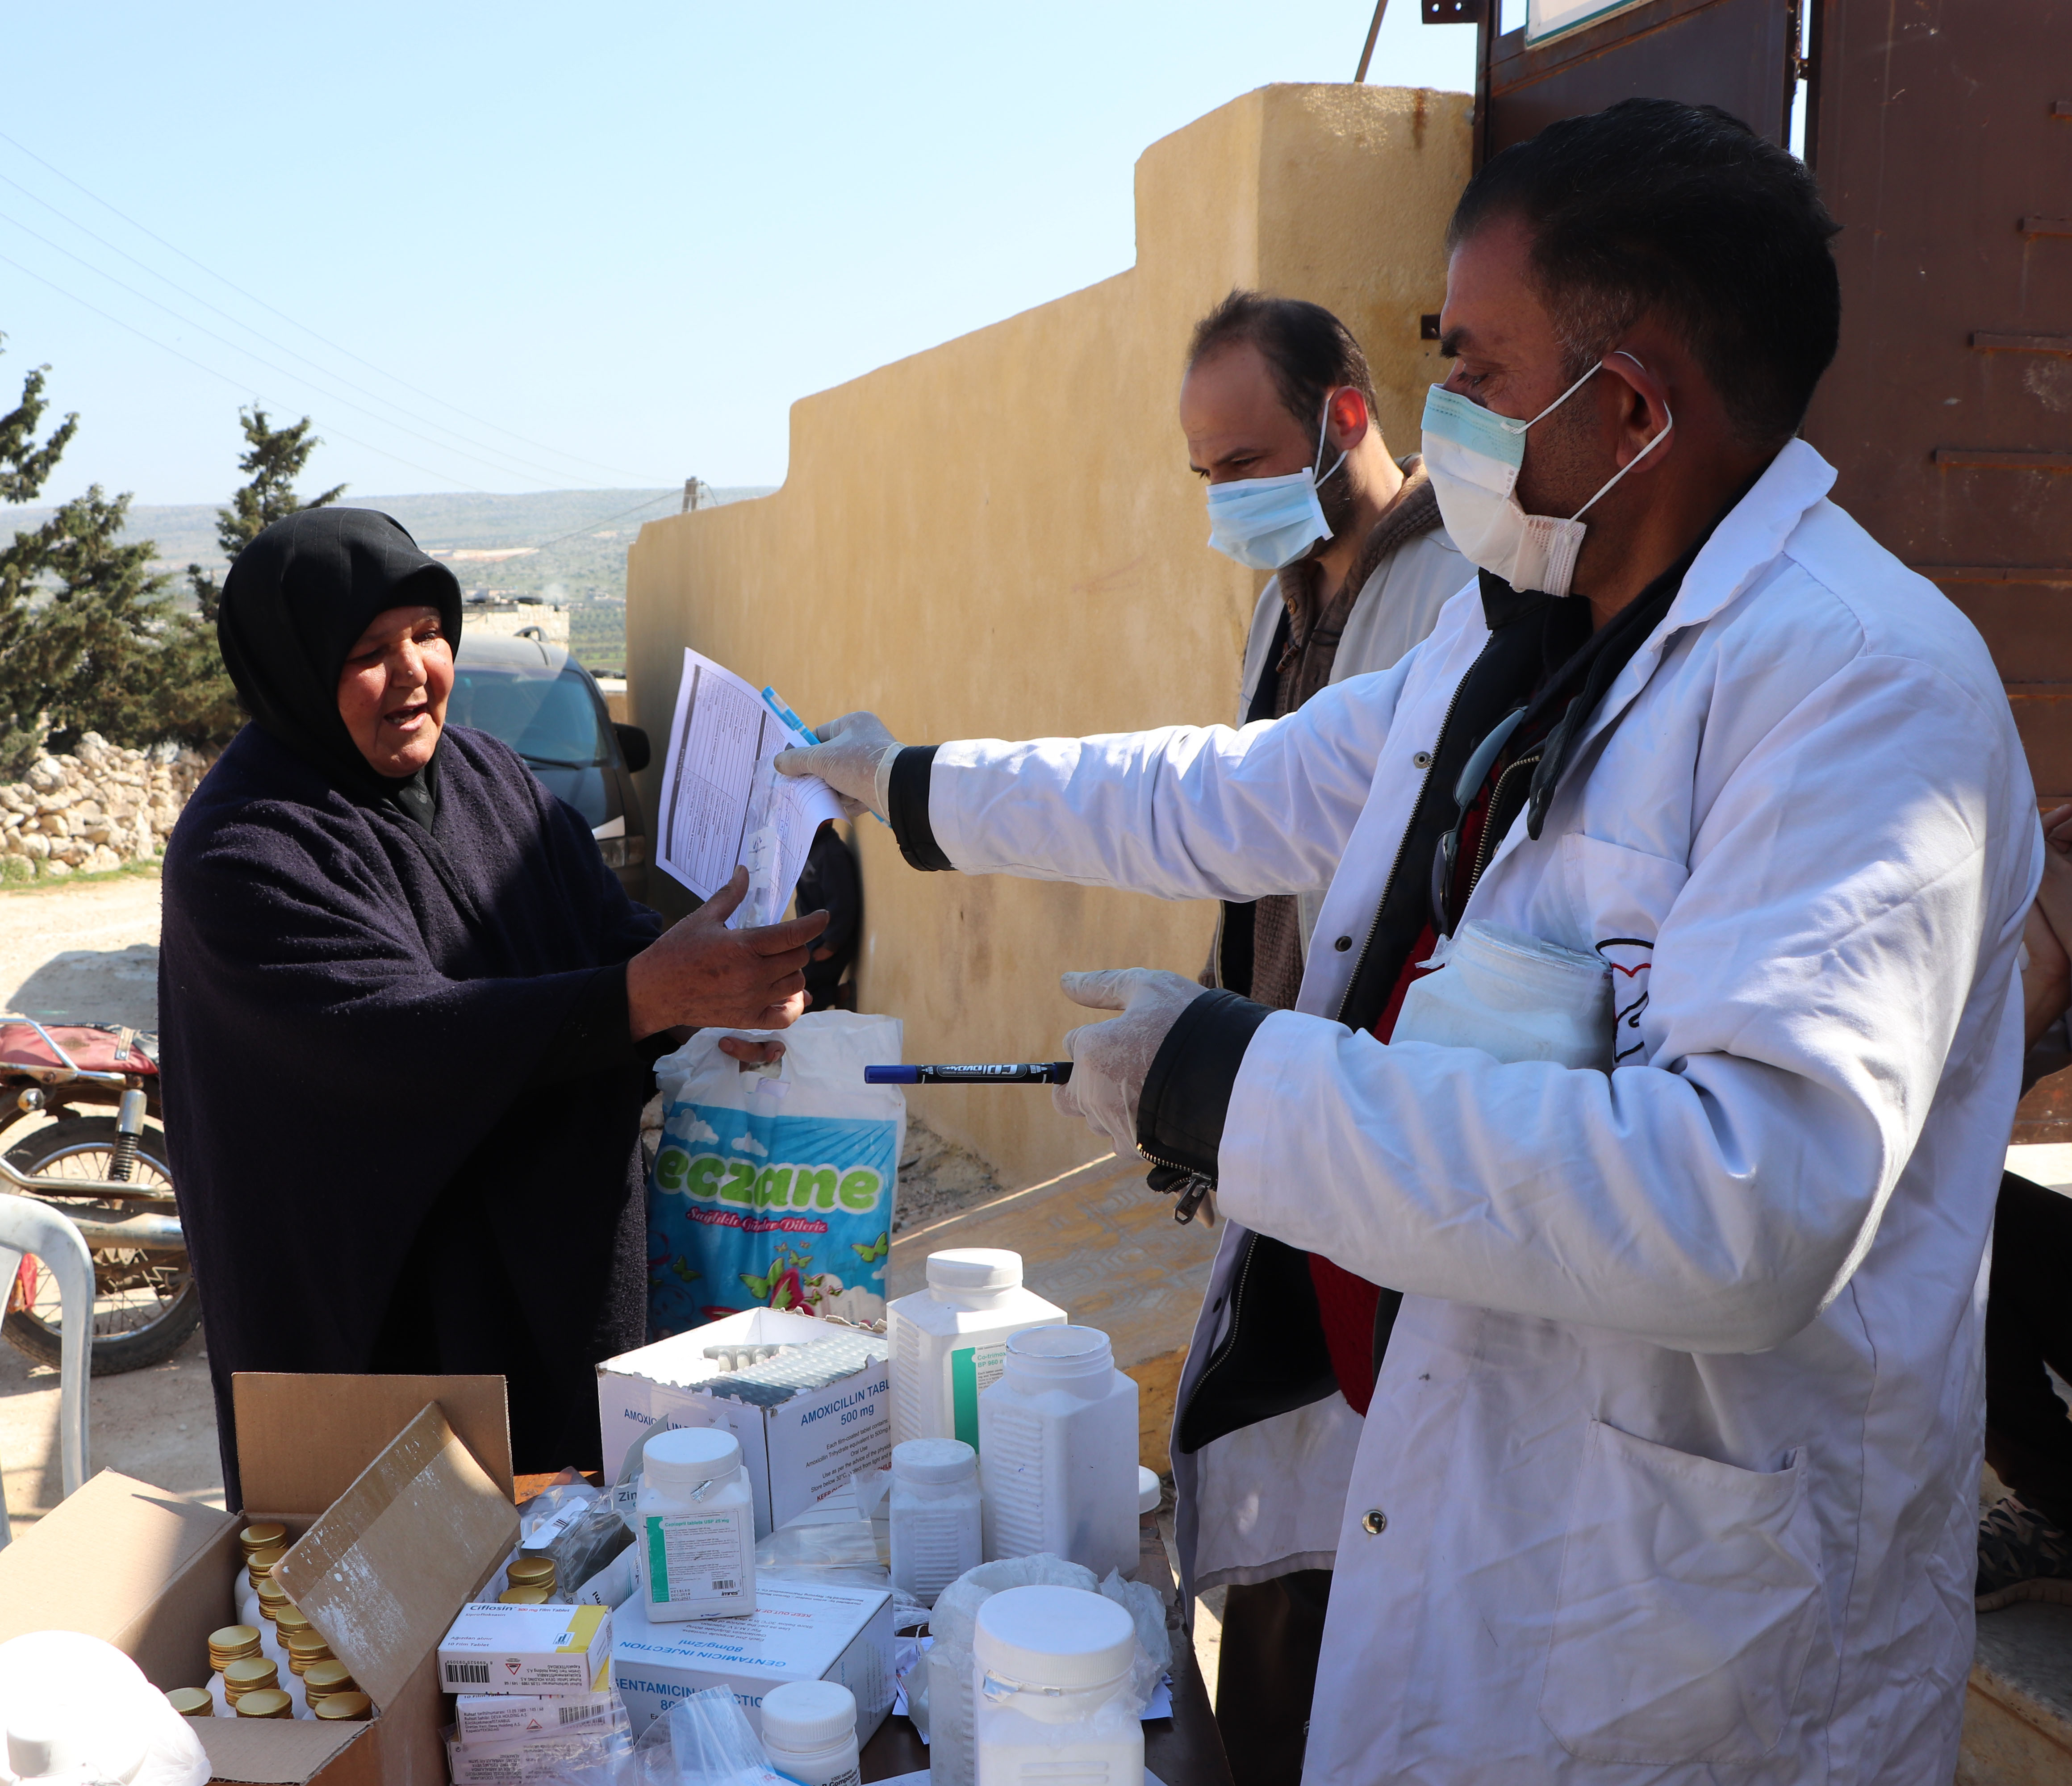 Balsam* receiving medication prescribed for her in North-West Syria